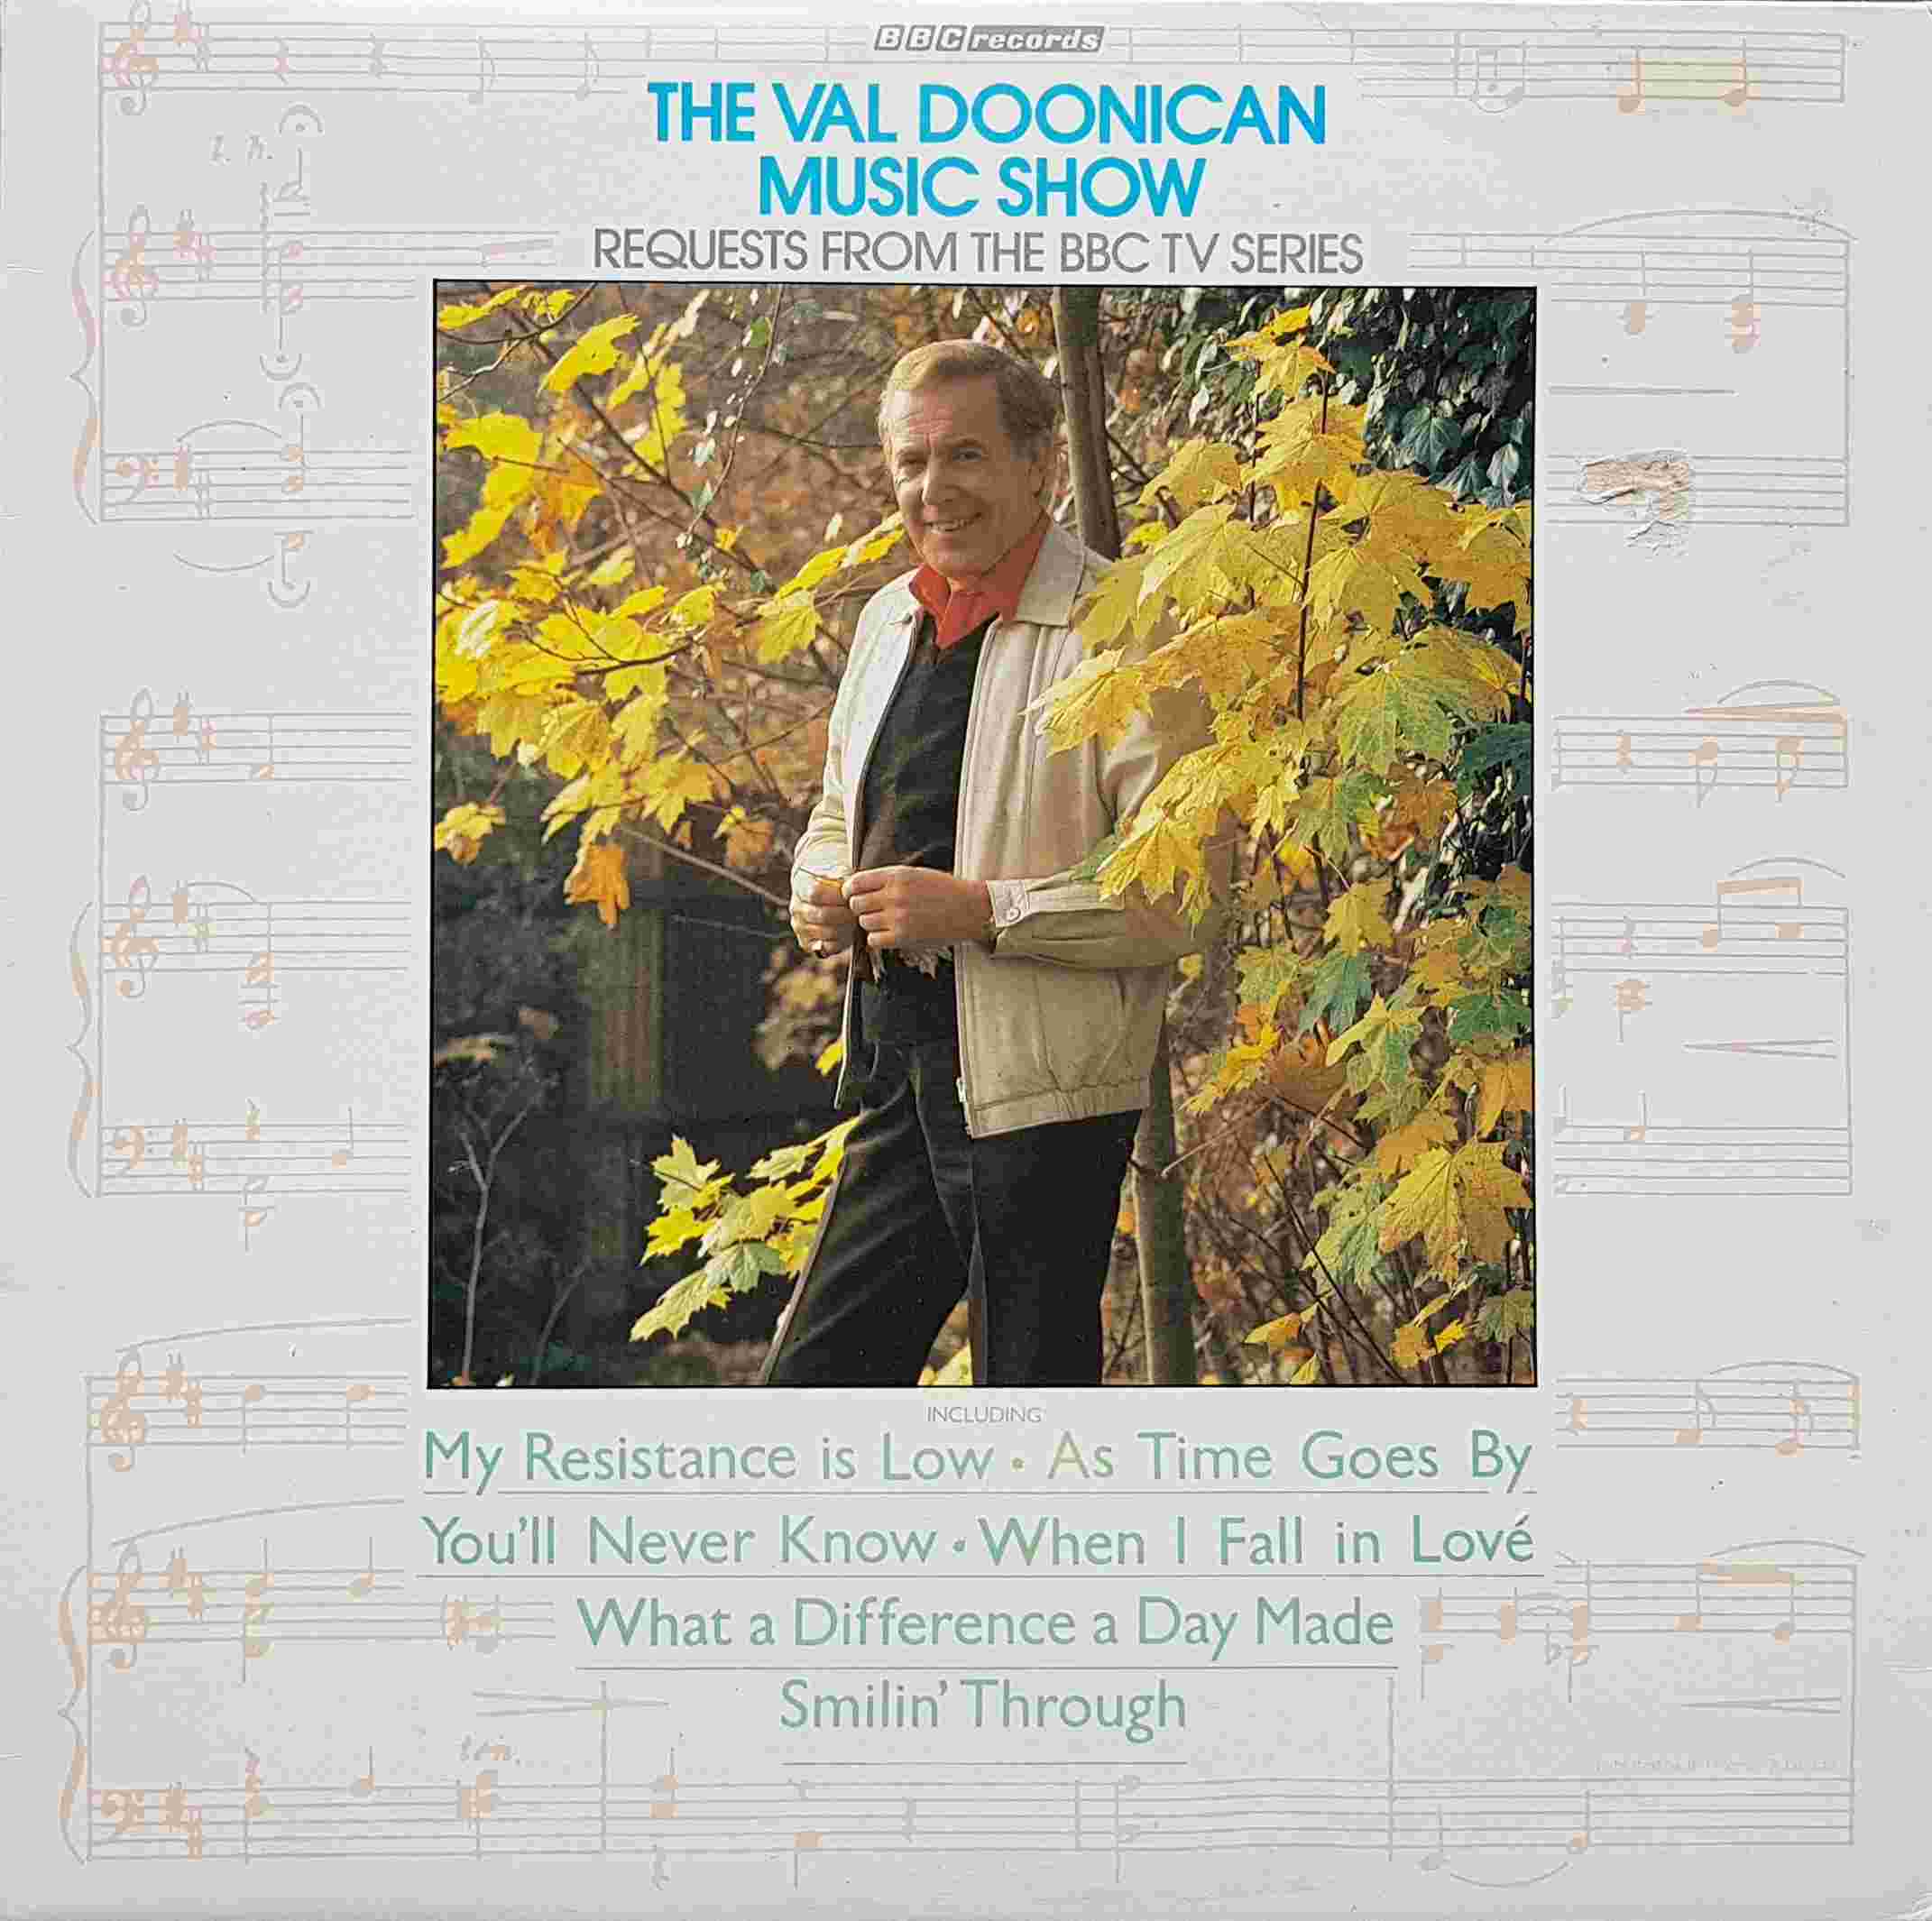 Picture of 823 135-1 The Val Doonican Music Show (Australian import) by artist Various from the BBC albums - Records and Tapes library